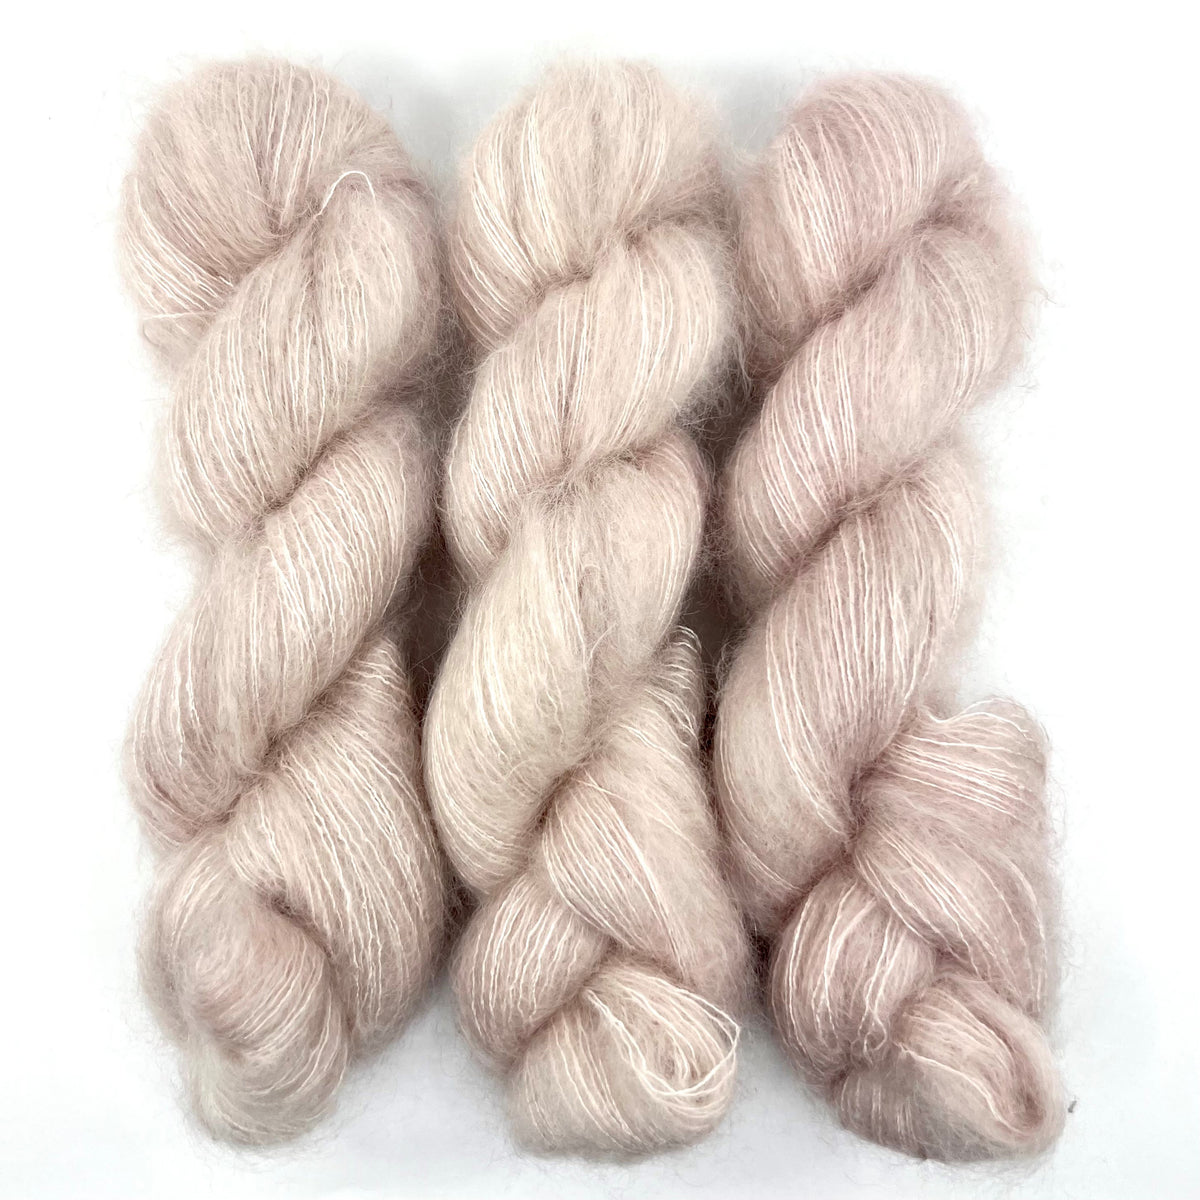 Apple Blossom - Delicacy Lace - Dyed Stock